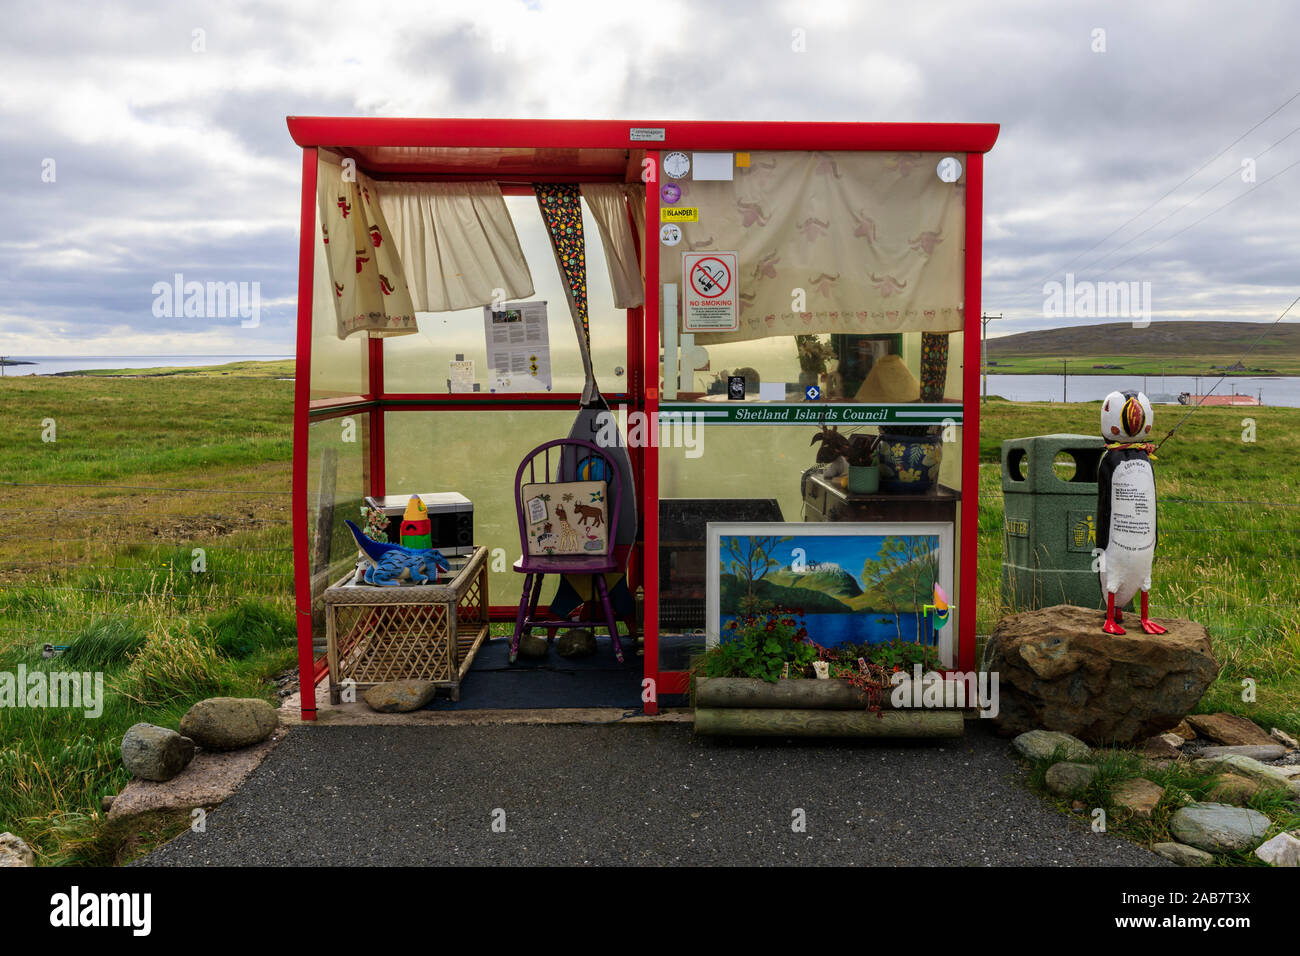 Bobby's Bus Shelter, uniquely decorated and quirky, annual theme, Baltasound, Island of Unst, Shetland Isles, Scotland, Europe Stock Photo